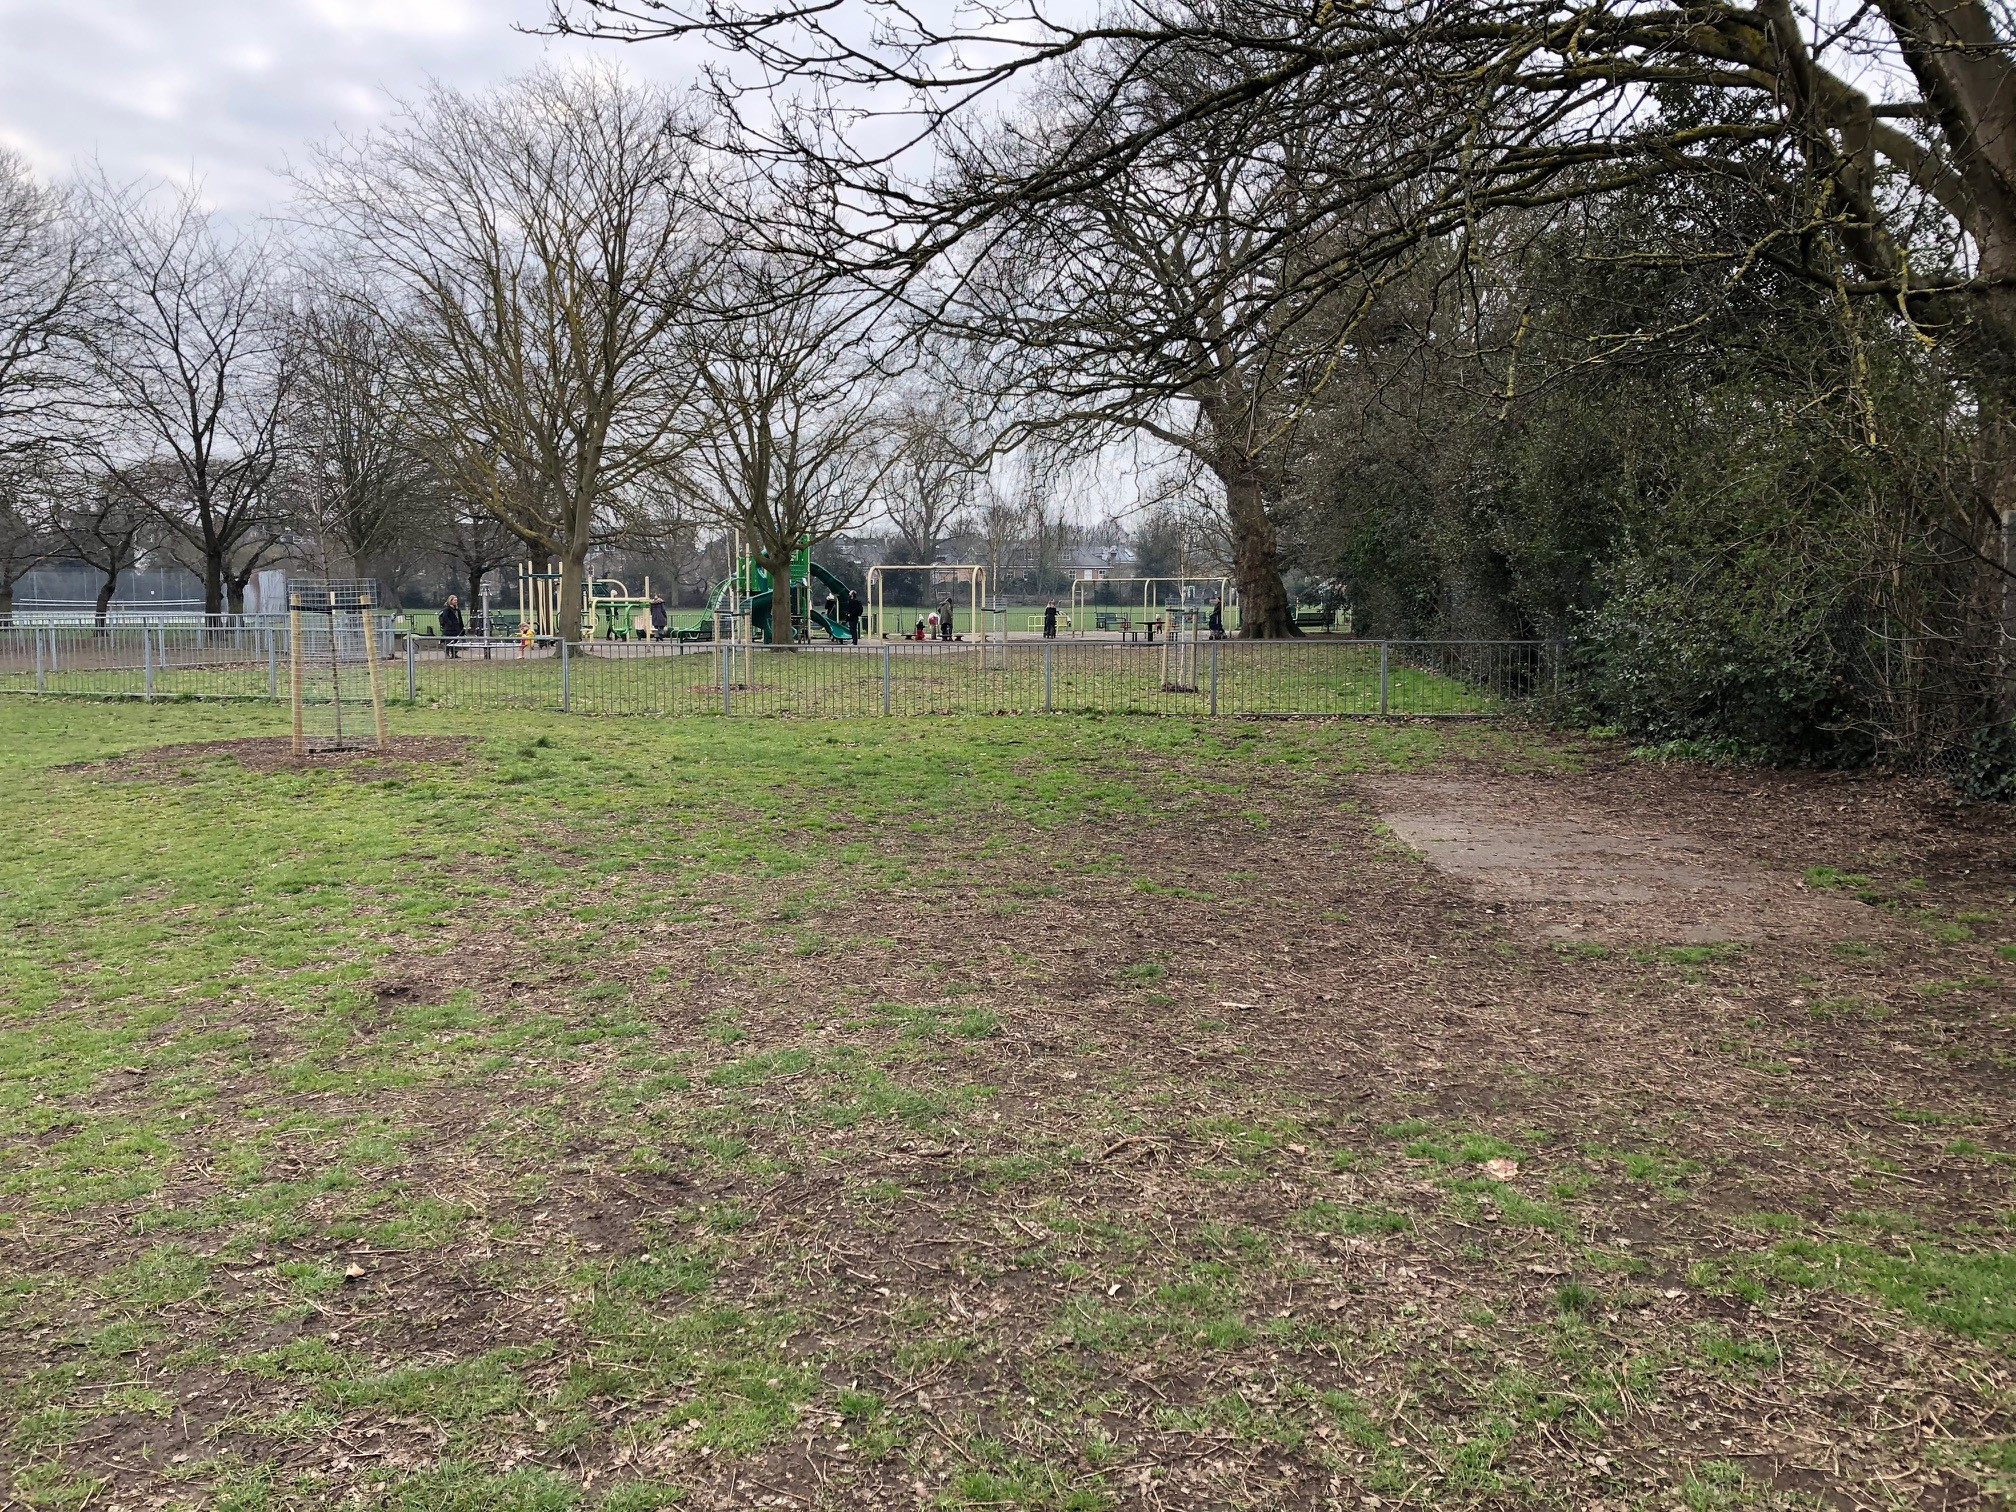 image of Moormead Park showing proposed outdoor gym area next to playground